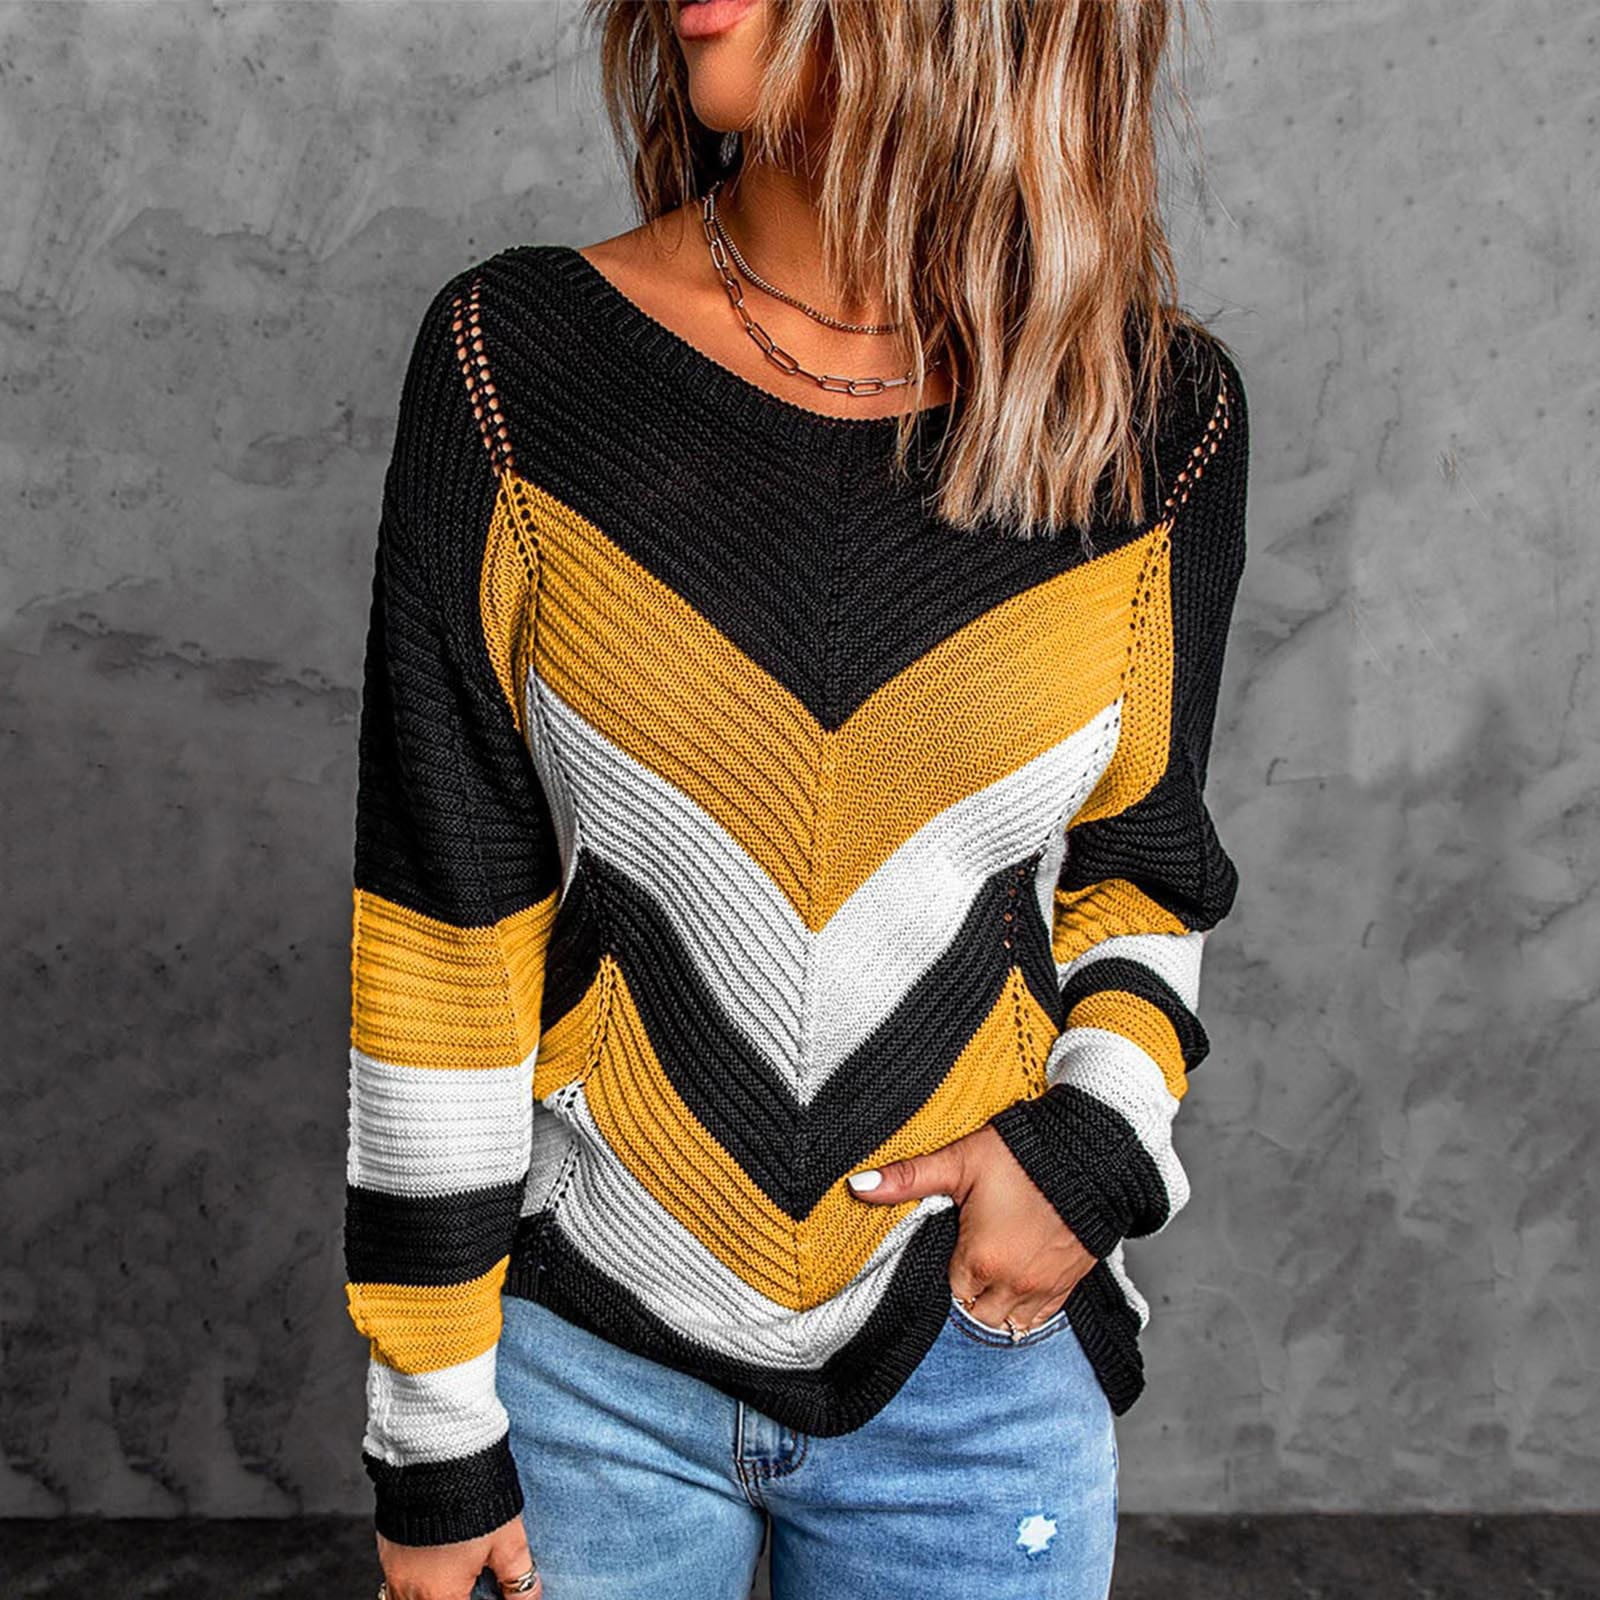 CAICJ98 Boat Neck Batwing Sleeves Dolman Knitted Sweaters And Pullovers Tops  For Women Women Sweater Yellow,XL - Walmart.com